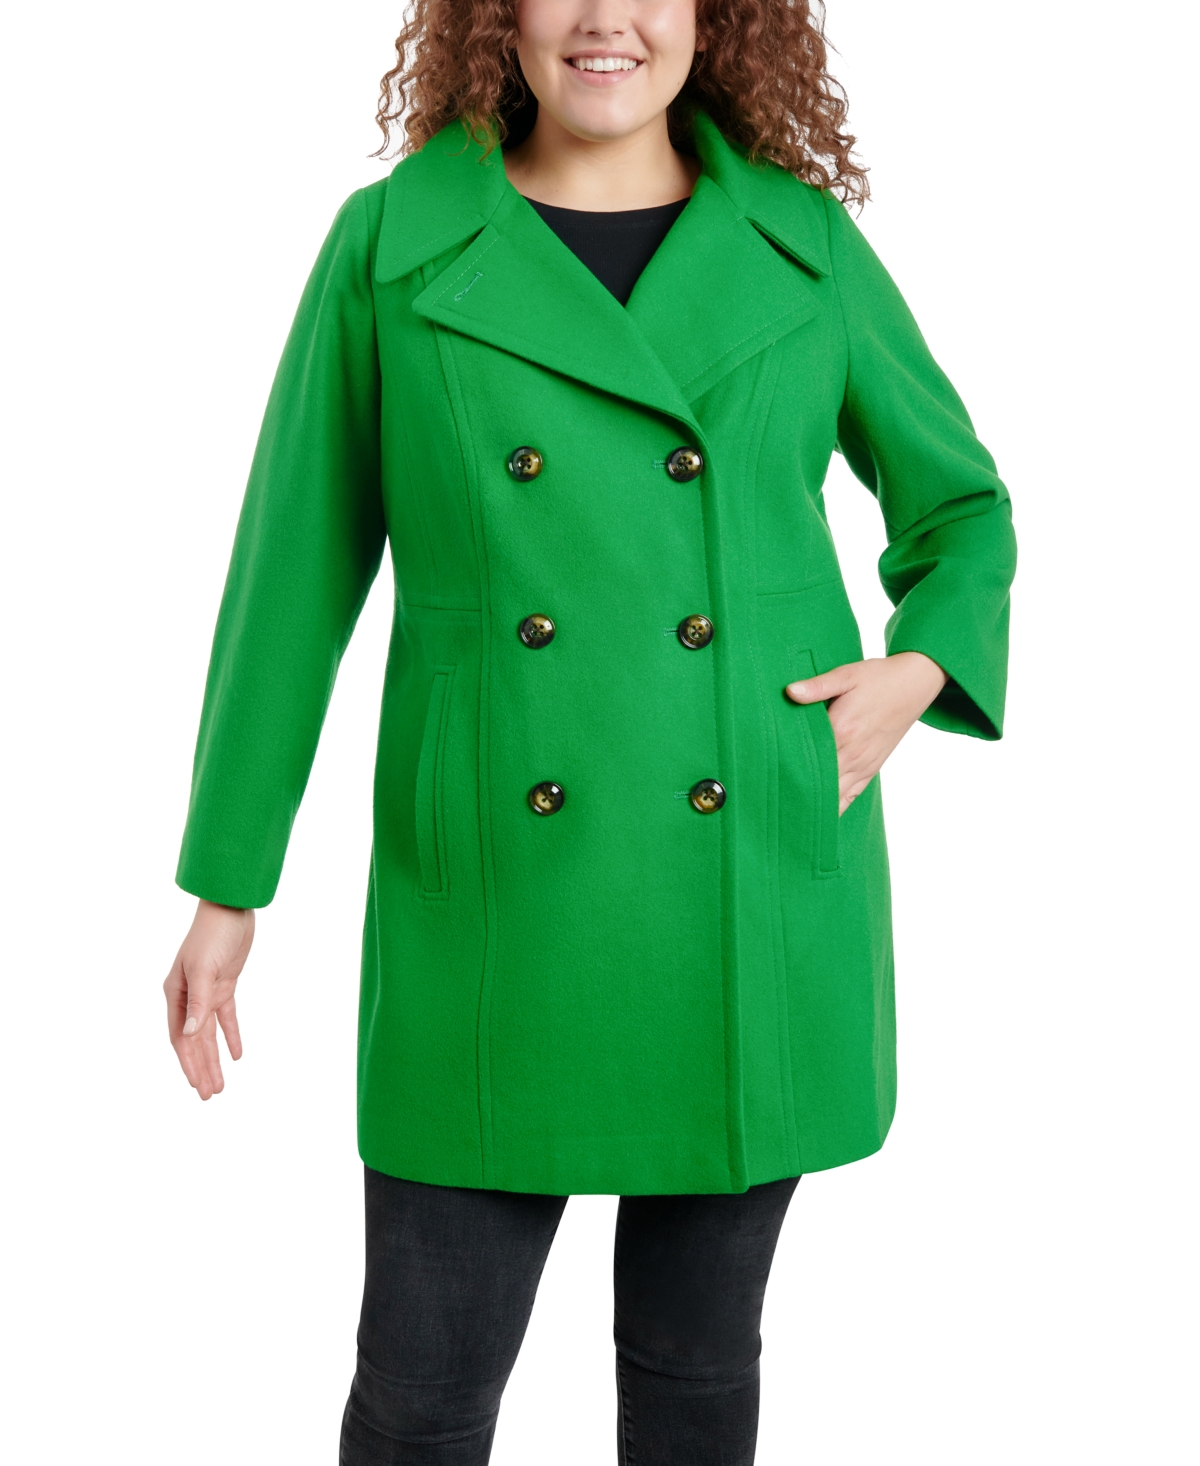 ANNE KLEIN WOMEN'S PLUS SIZE NOTCHED-COLLAR DOUBLE-BREASTED PEACOAT, CREATED FOR MACY'S